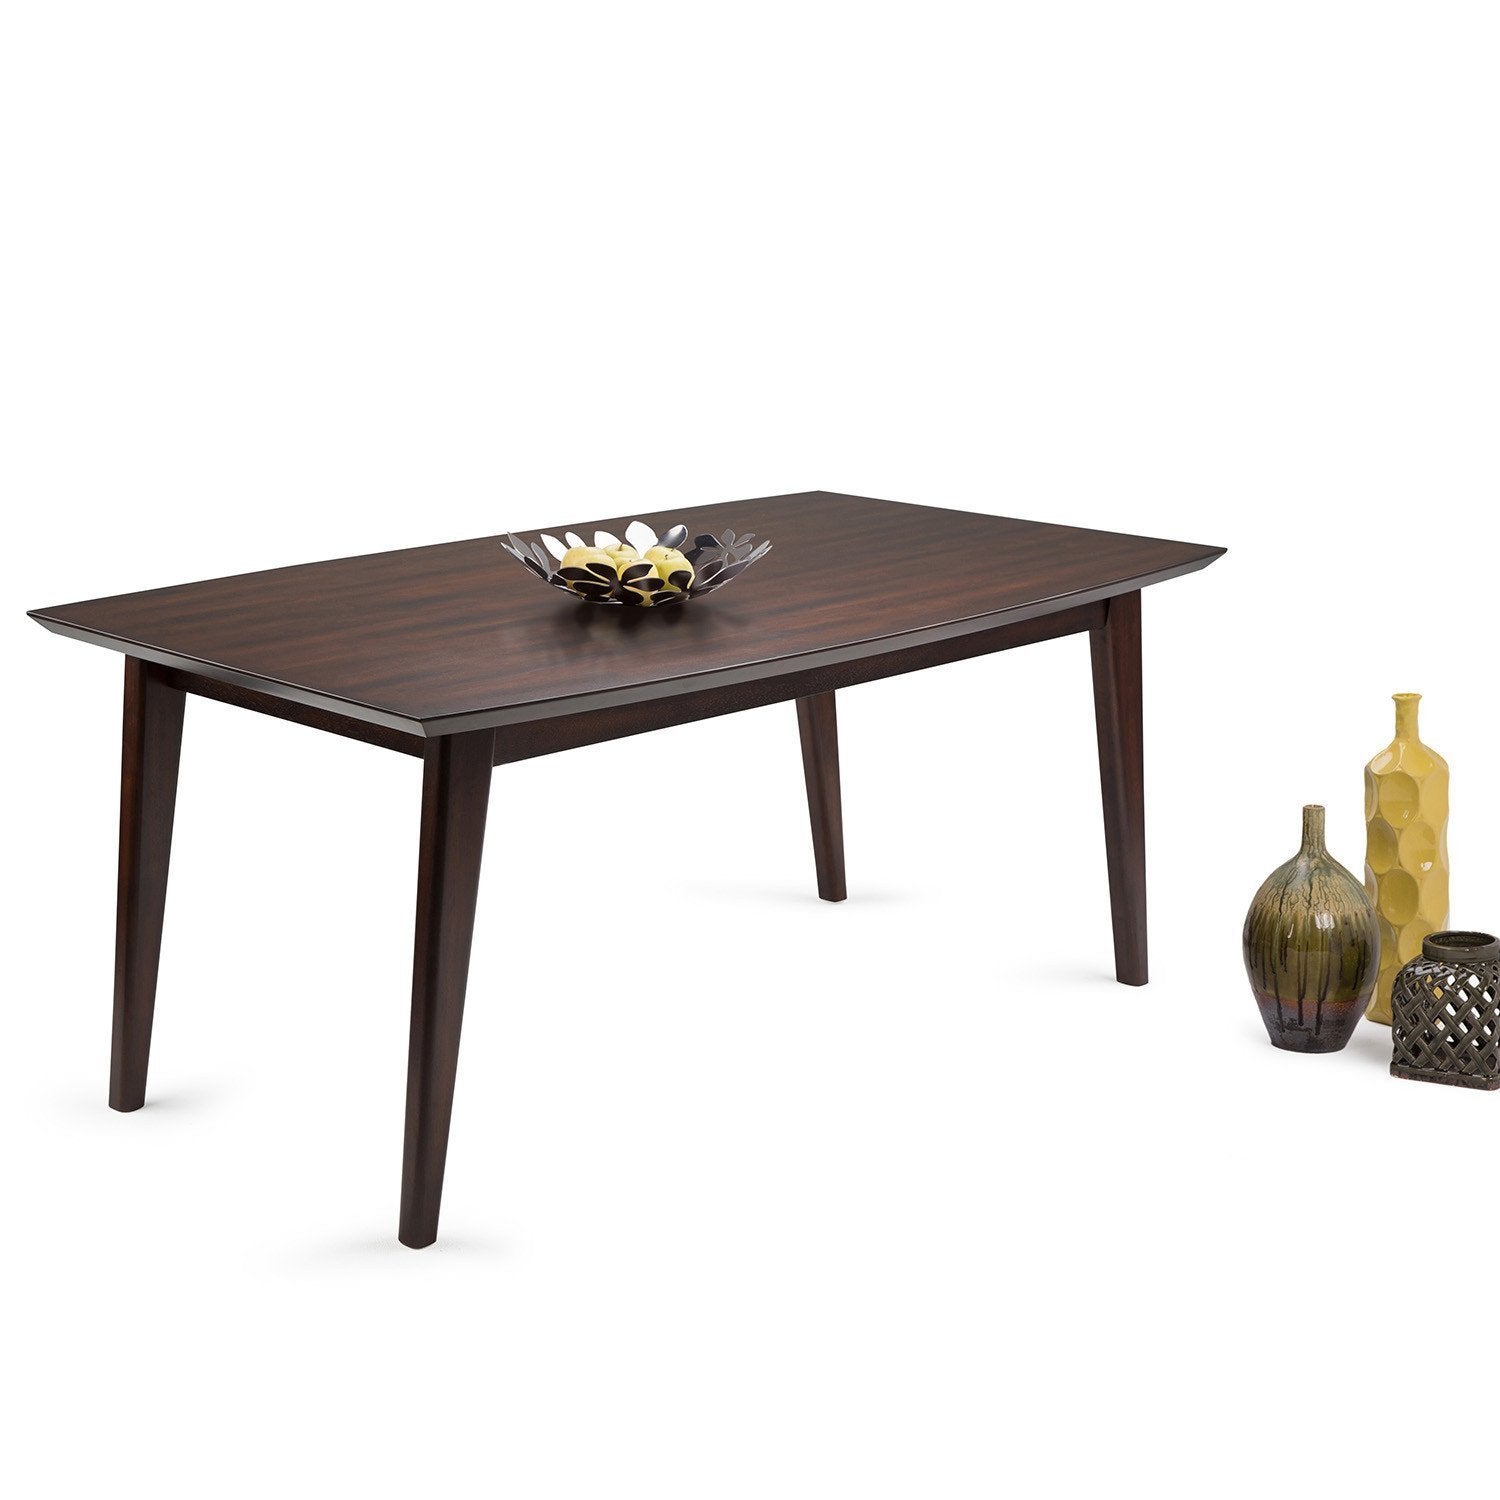 Java Brown Solid Wood - Rubber | Draper Mid Century Rectangular Dining Table